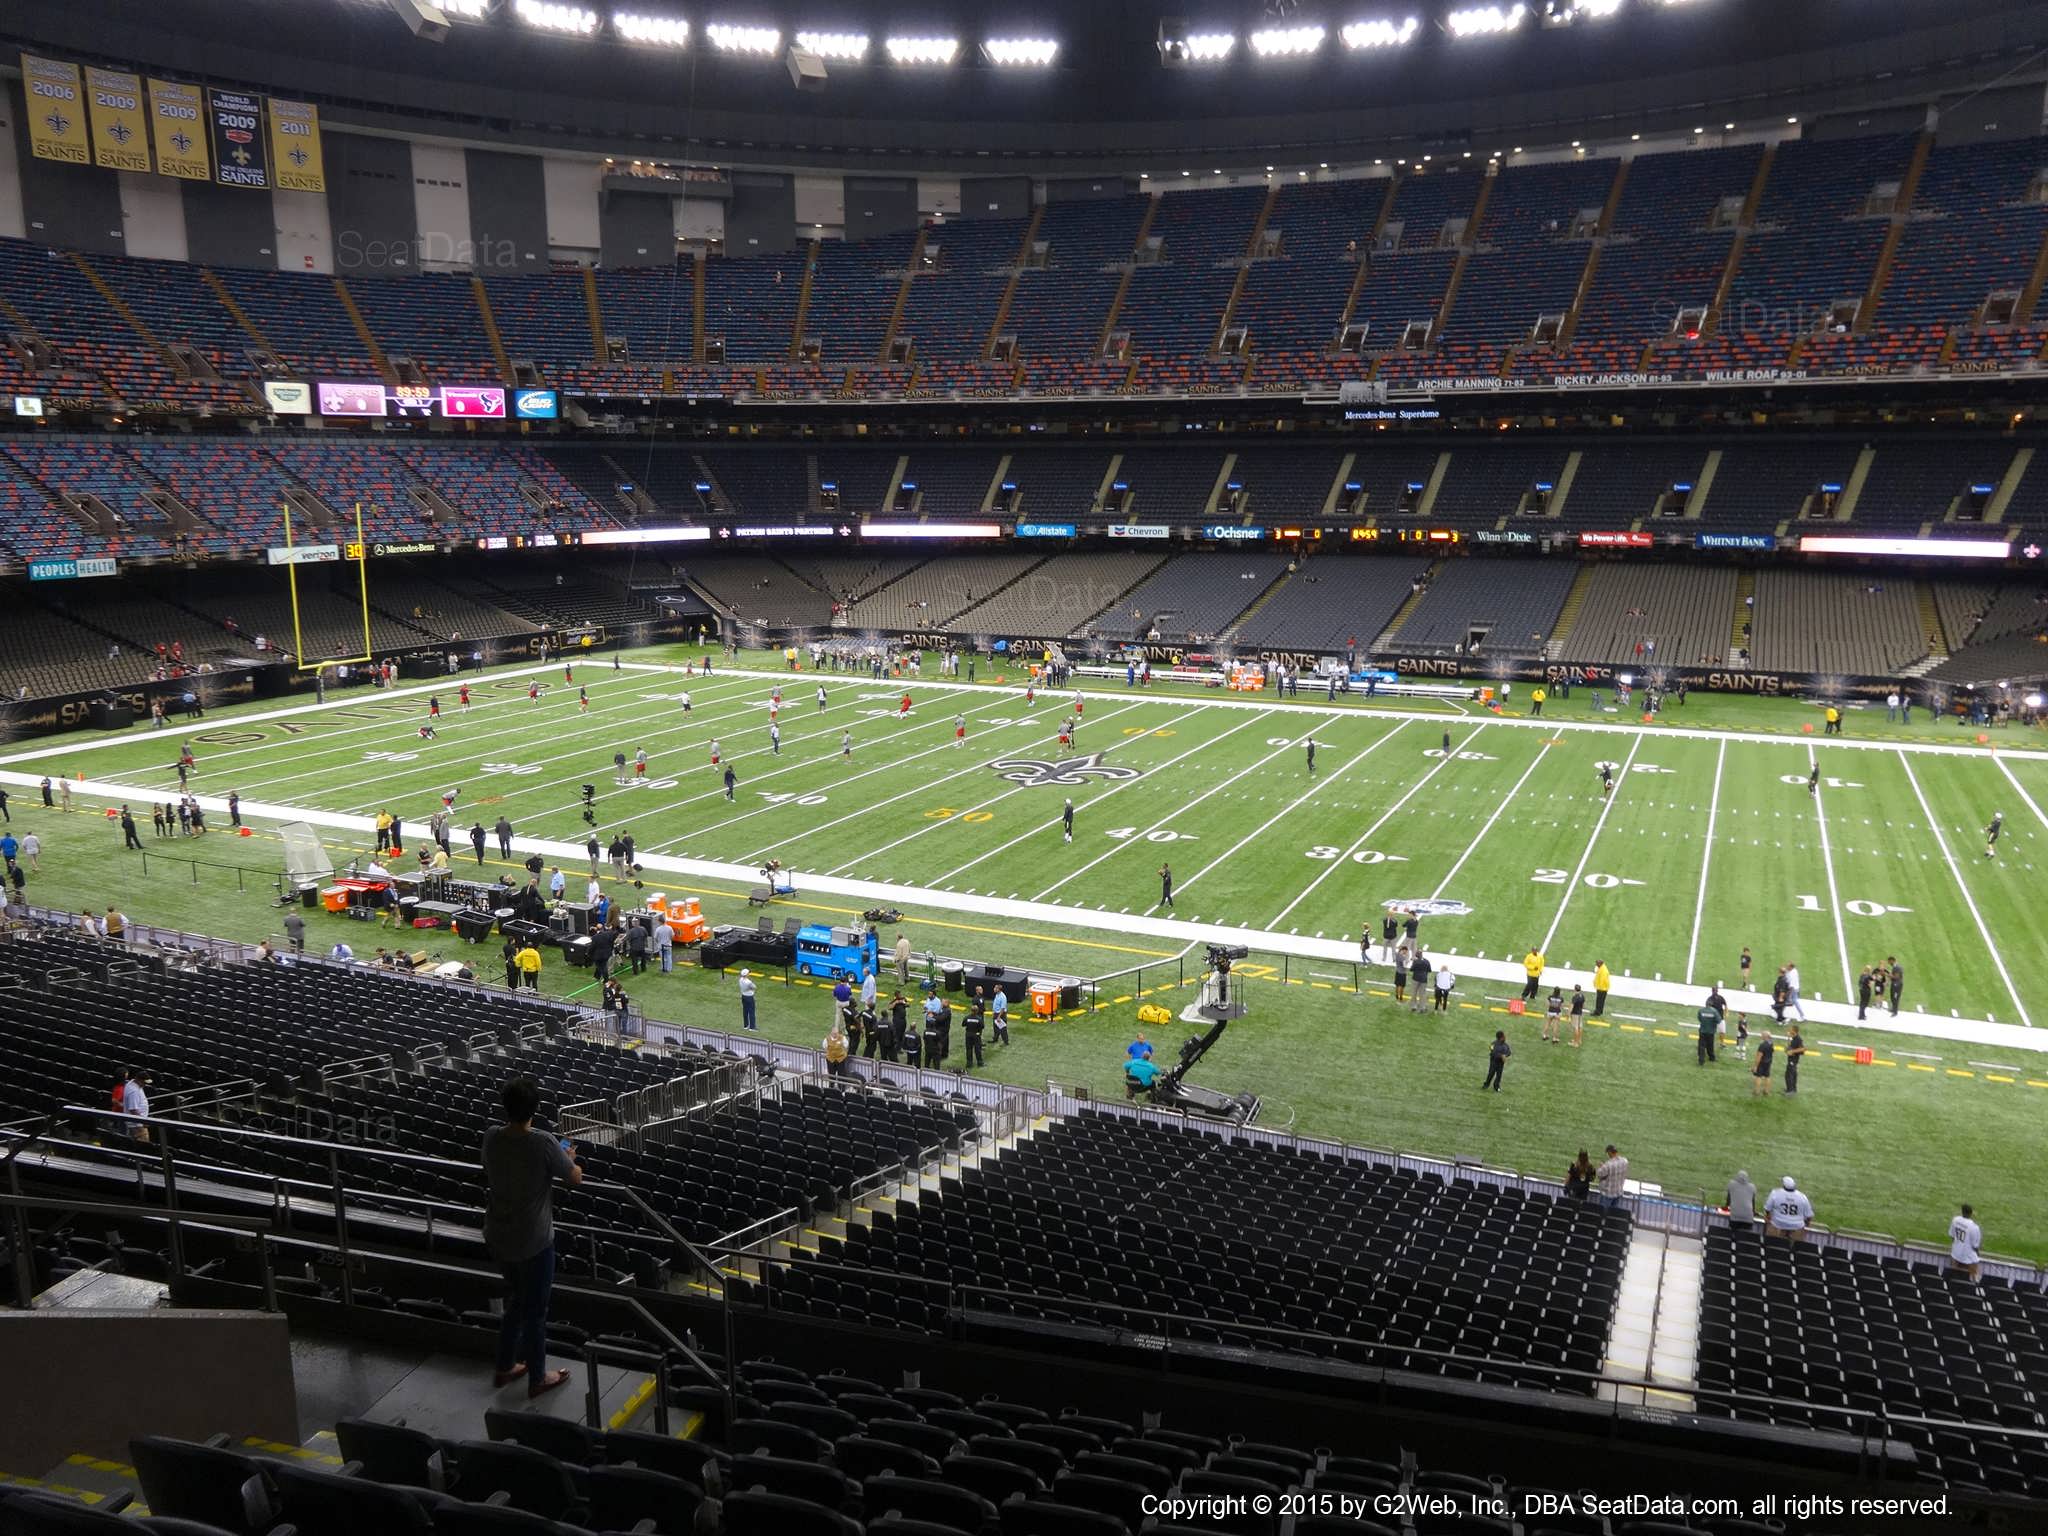 Seat view from section 333 at the Mercedes-Benz Superdome, home of the New Orleans Saints